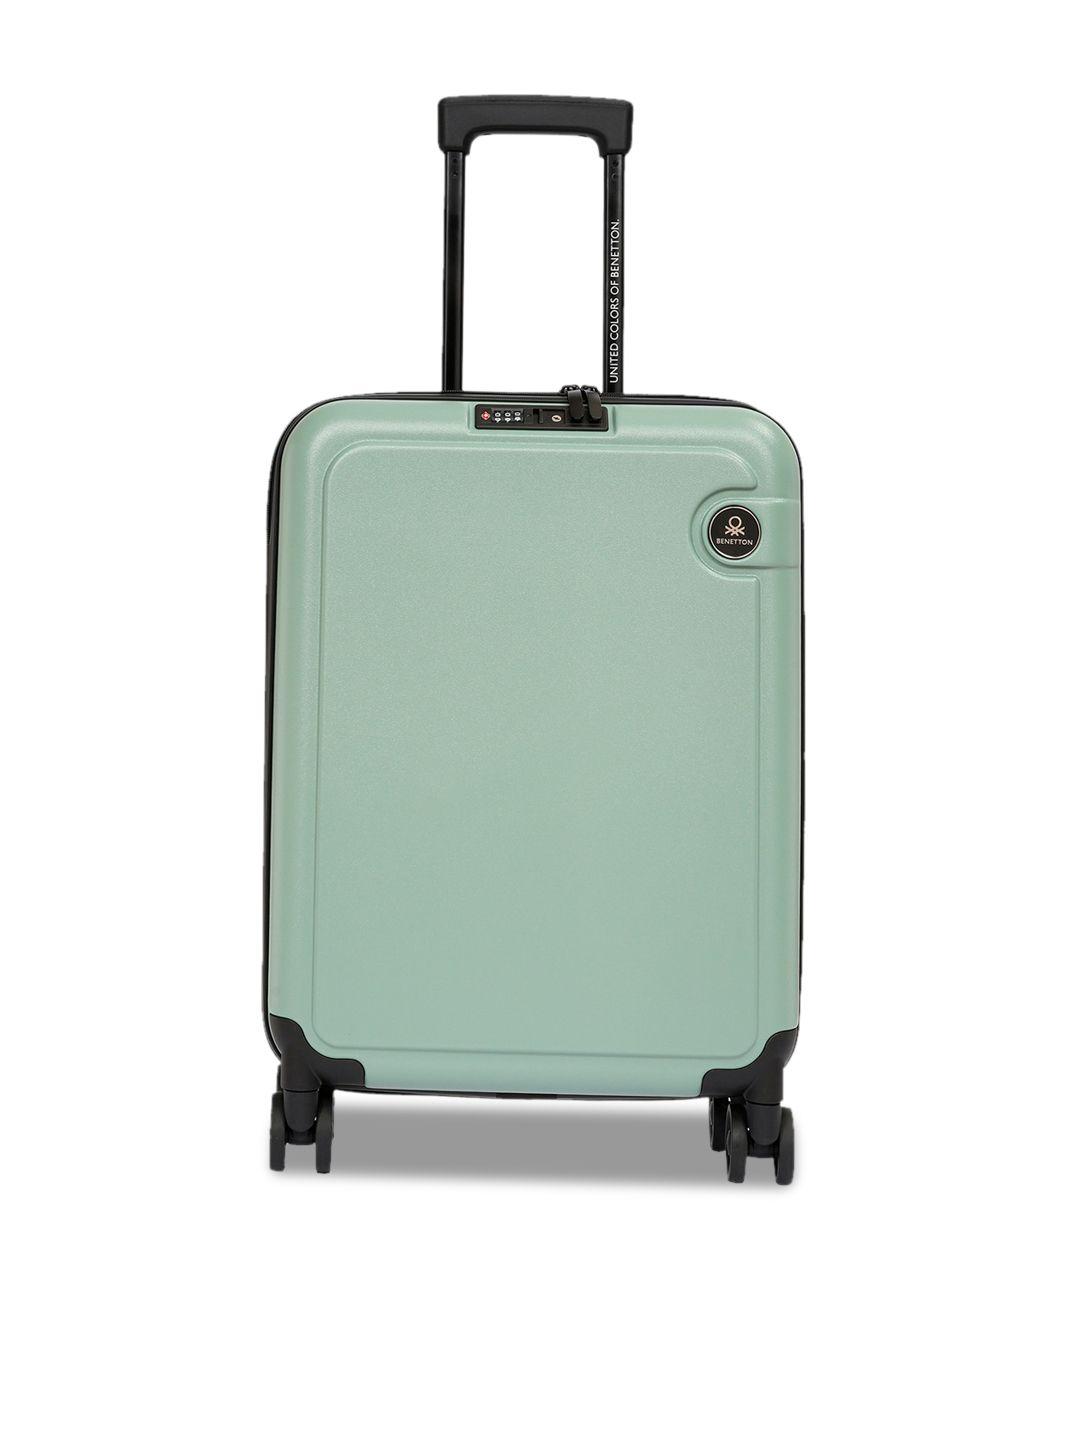 united colors of benetton hard-sided cabin trolley suitcase - 23 kg